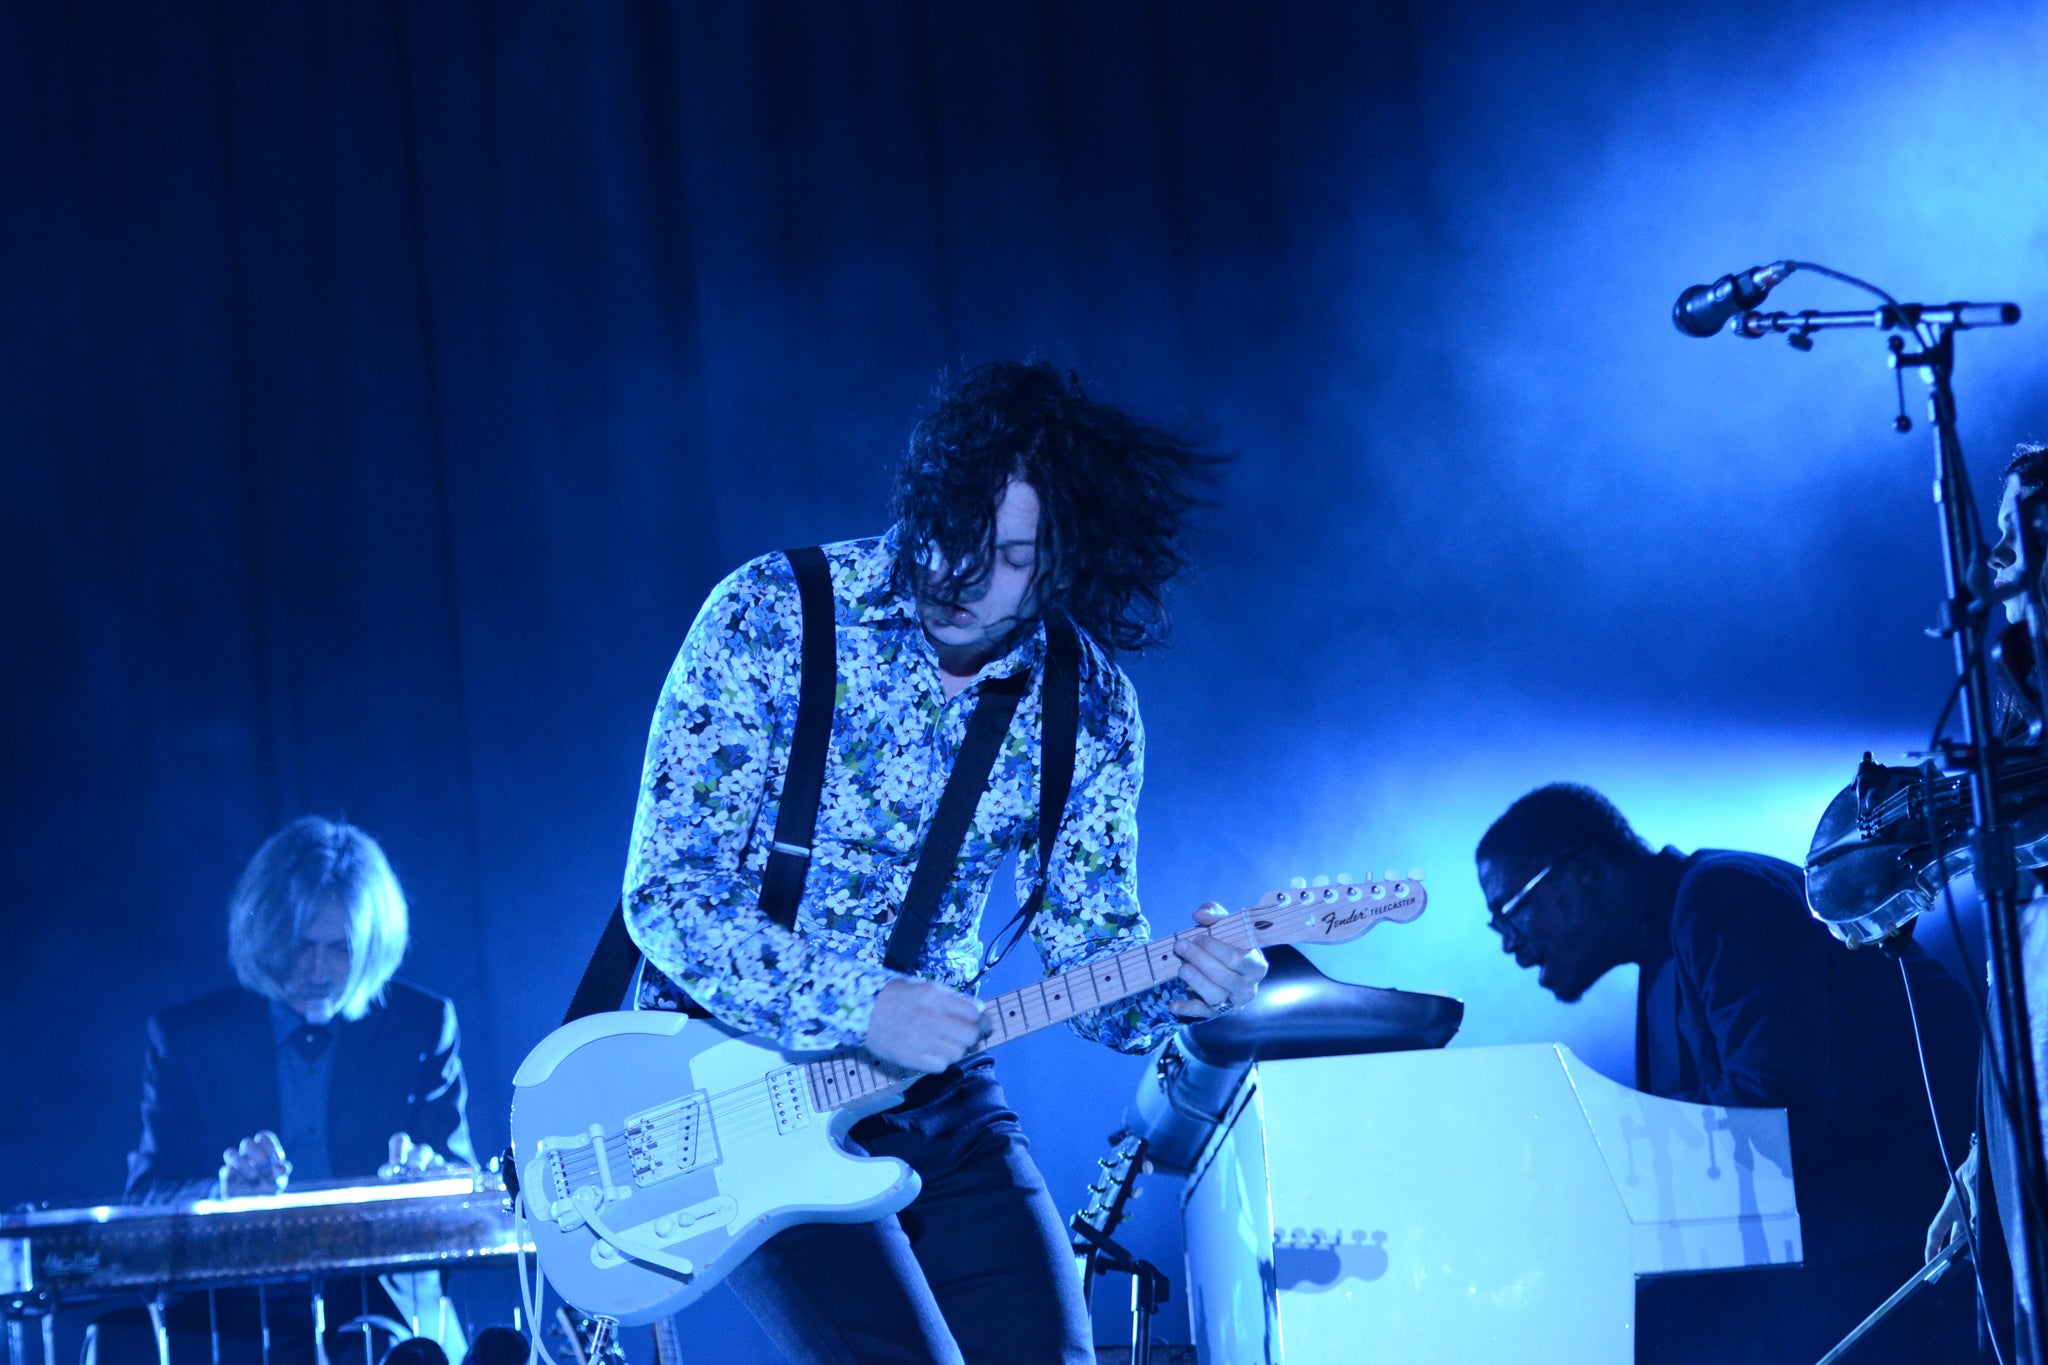 Keyboard player Isaiah 'Ikey' Owens, who has died aged 38, is seen here behind Jack White